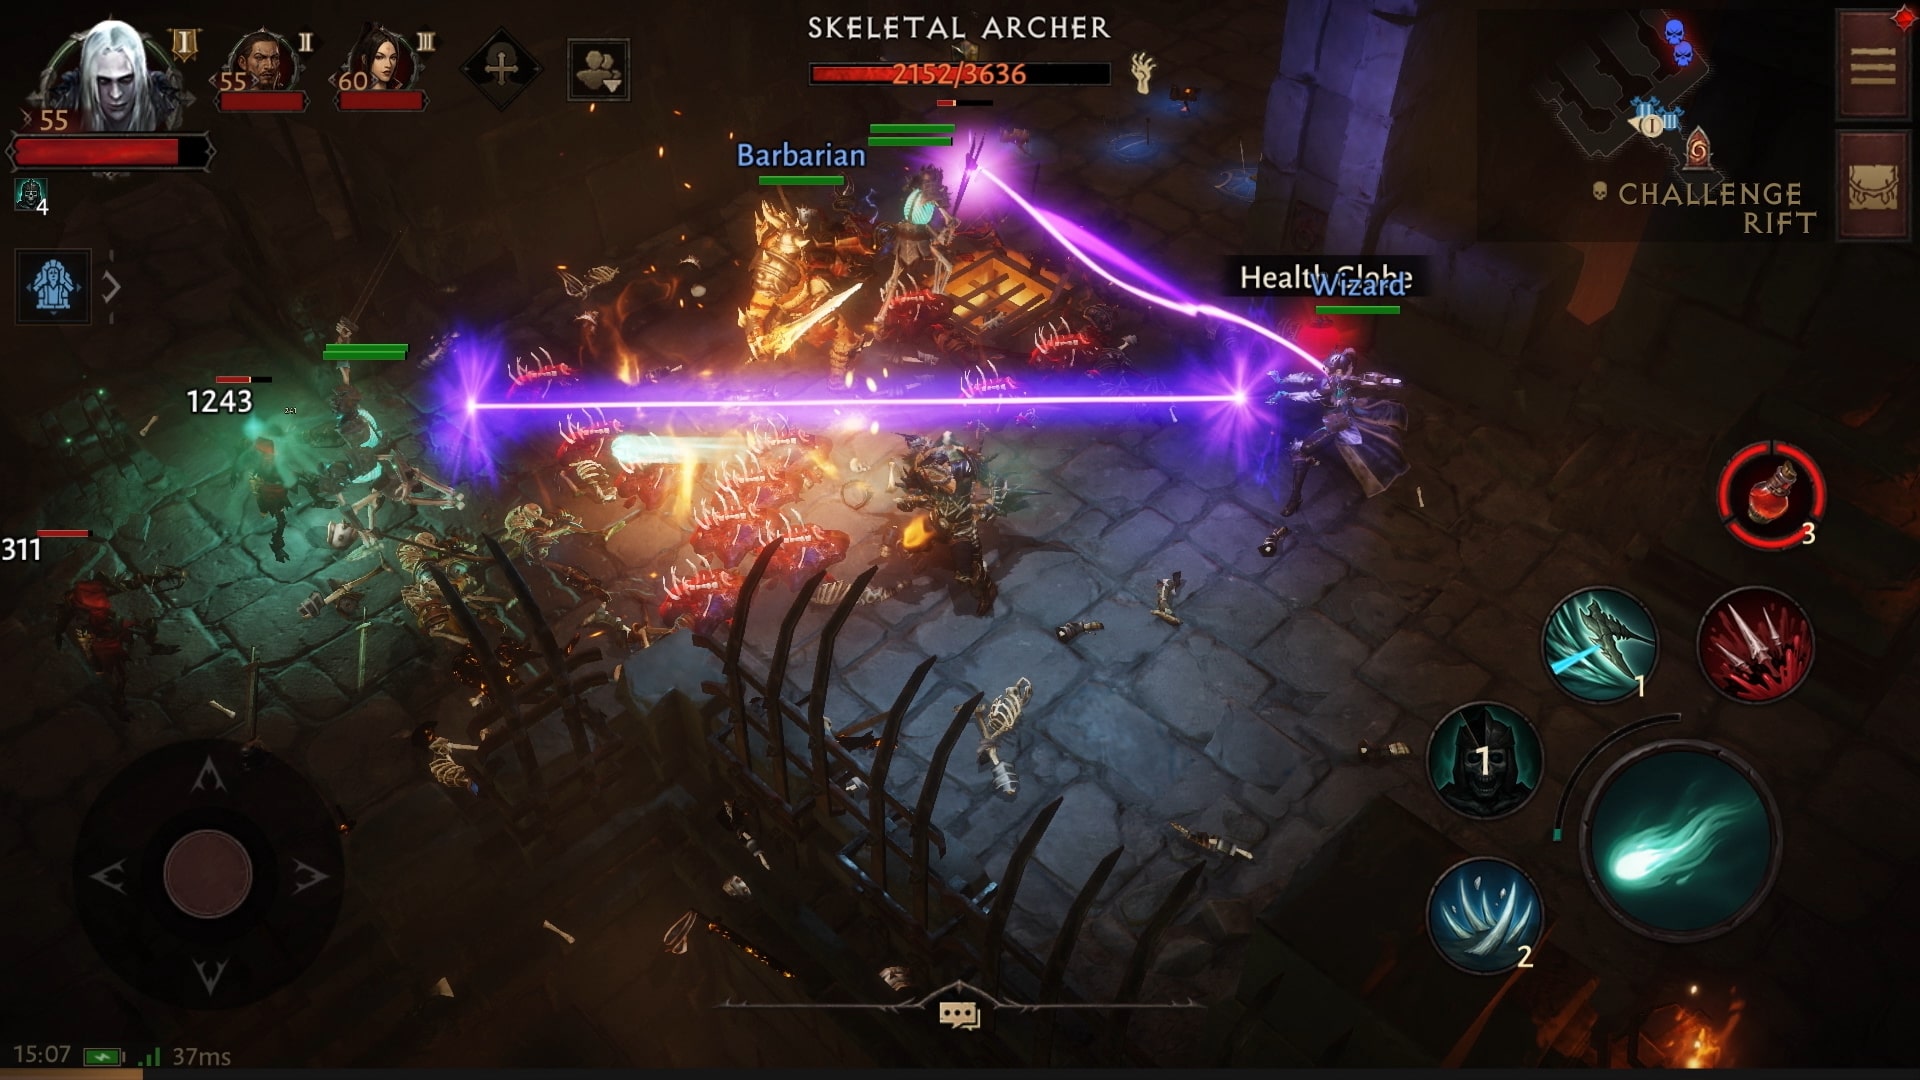 How Diablo Immortal Does (and Doesn't) Change Traditional Diablo